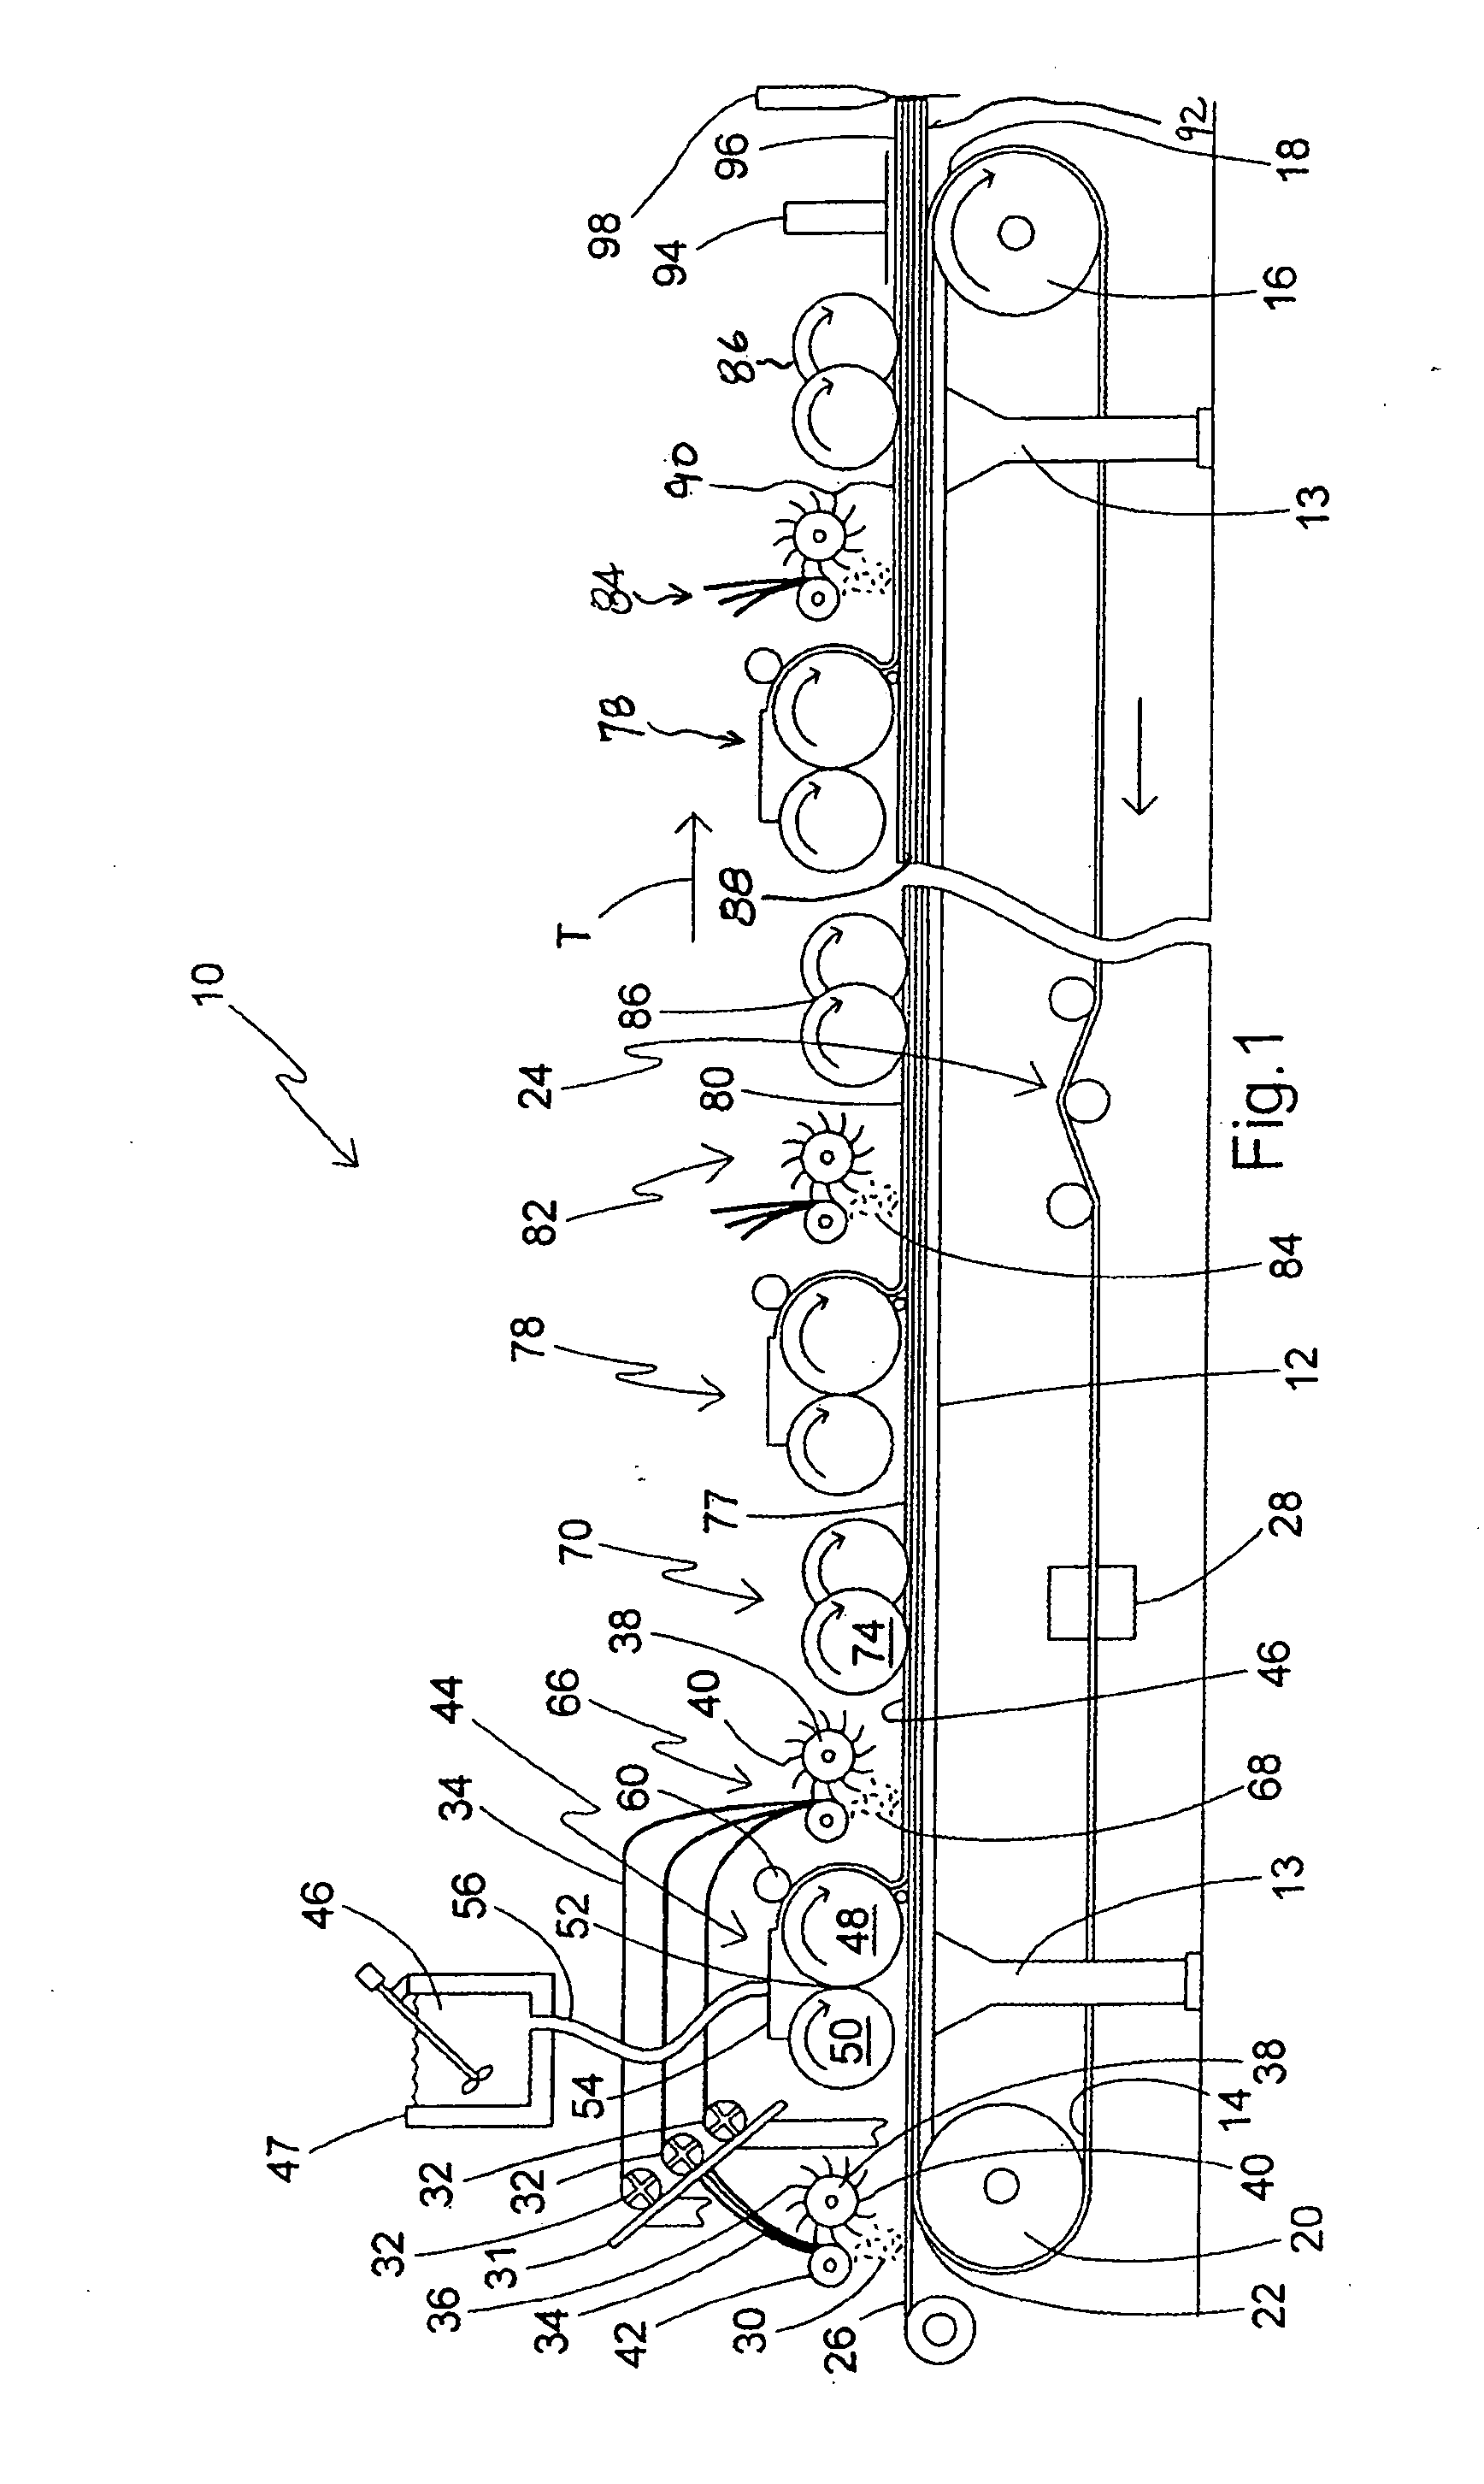 Multi-layer process and apparatus for producing high strength fiber-reinforced structural cementitious panels with enhanced fiber content